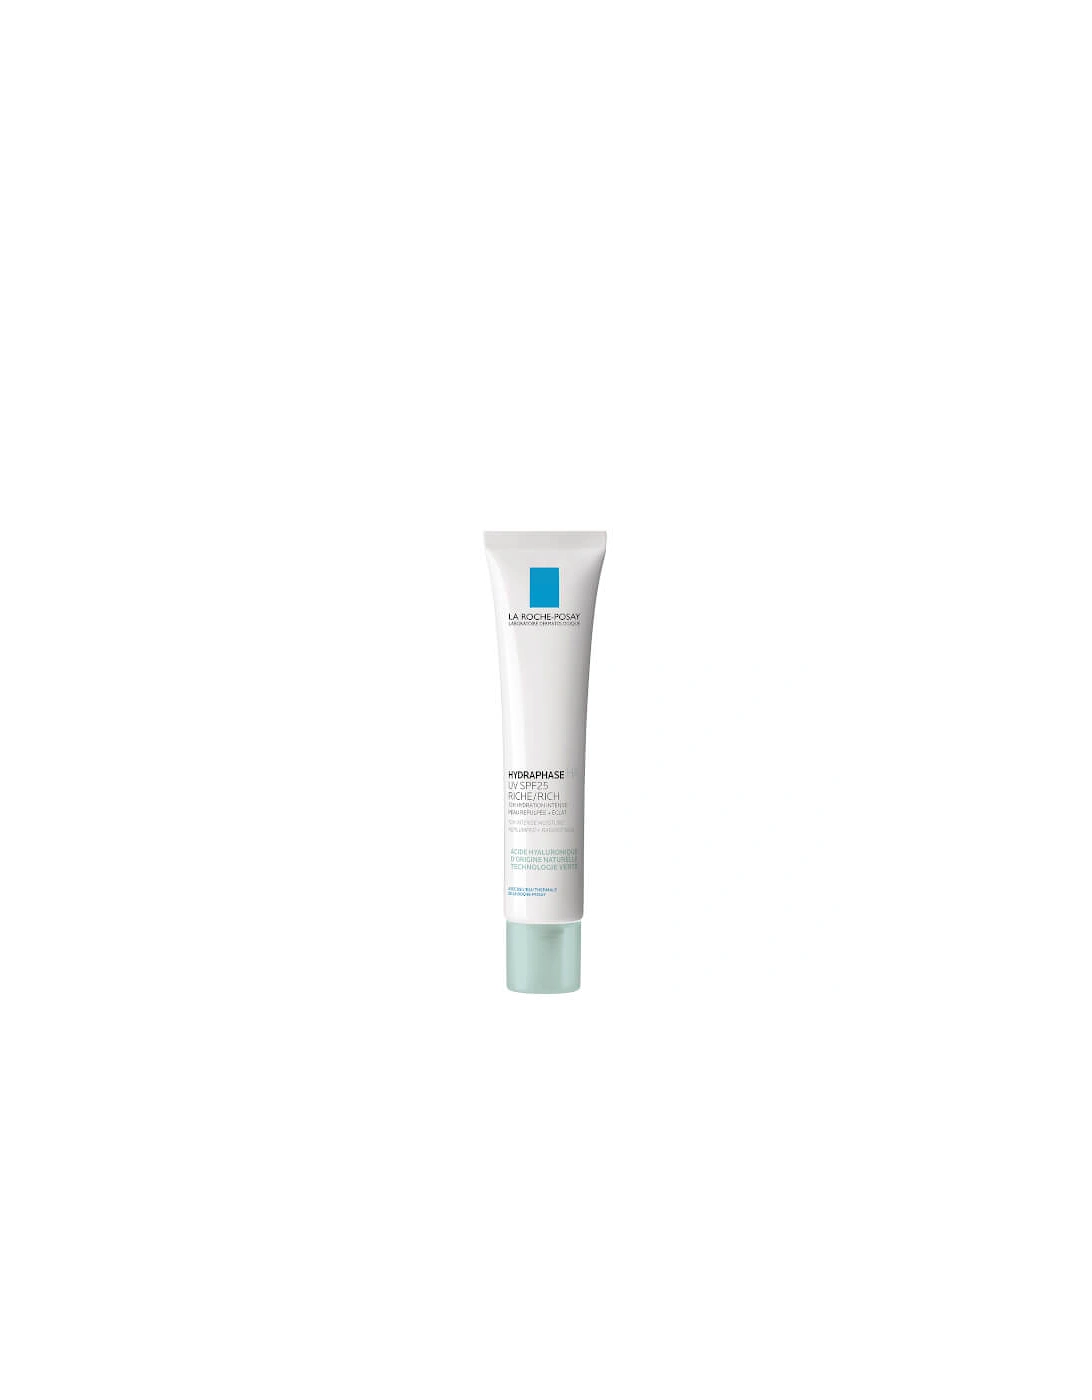 La Roche-Posay Hydraphase UV Riche Moisturizing Cream 40ml for Dehydrated and Sensitive Skin Prone to Dryness, 2 of 1